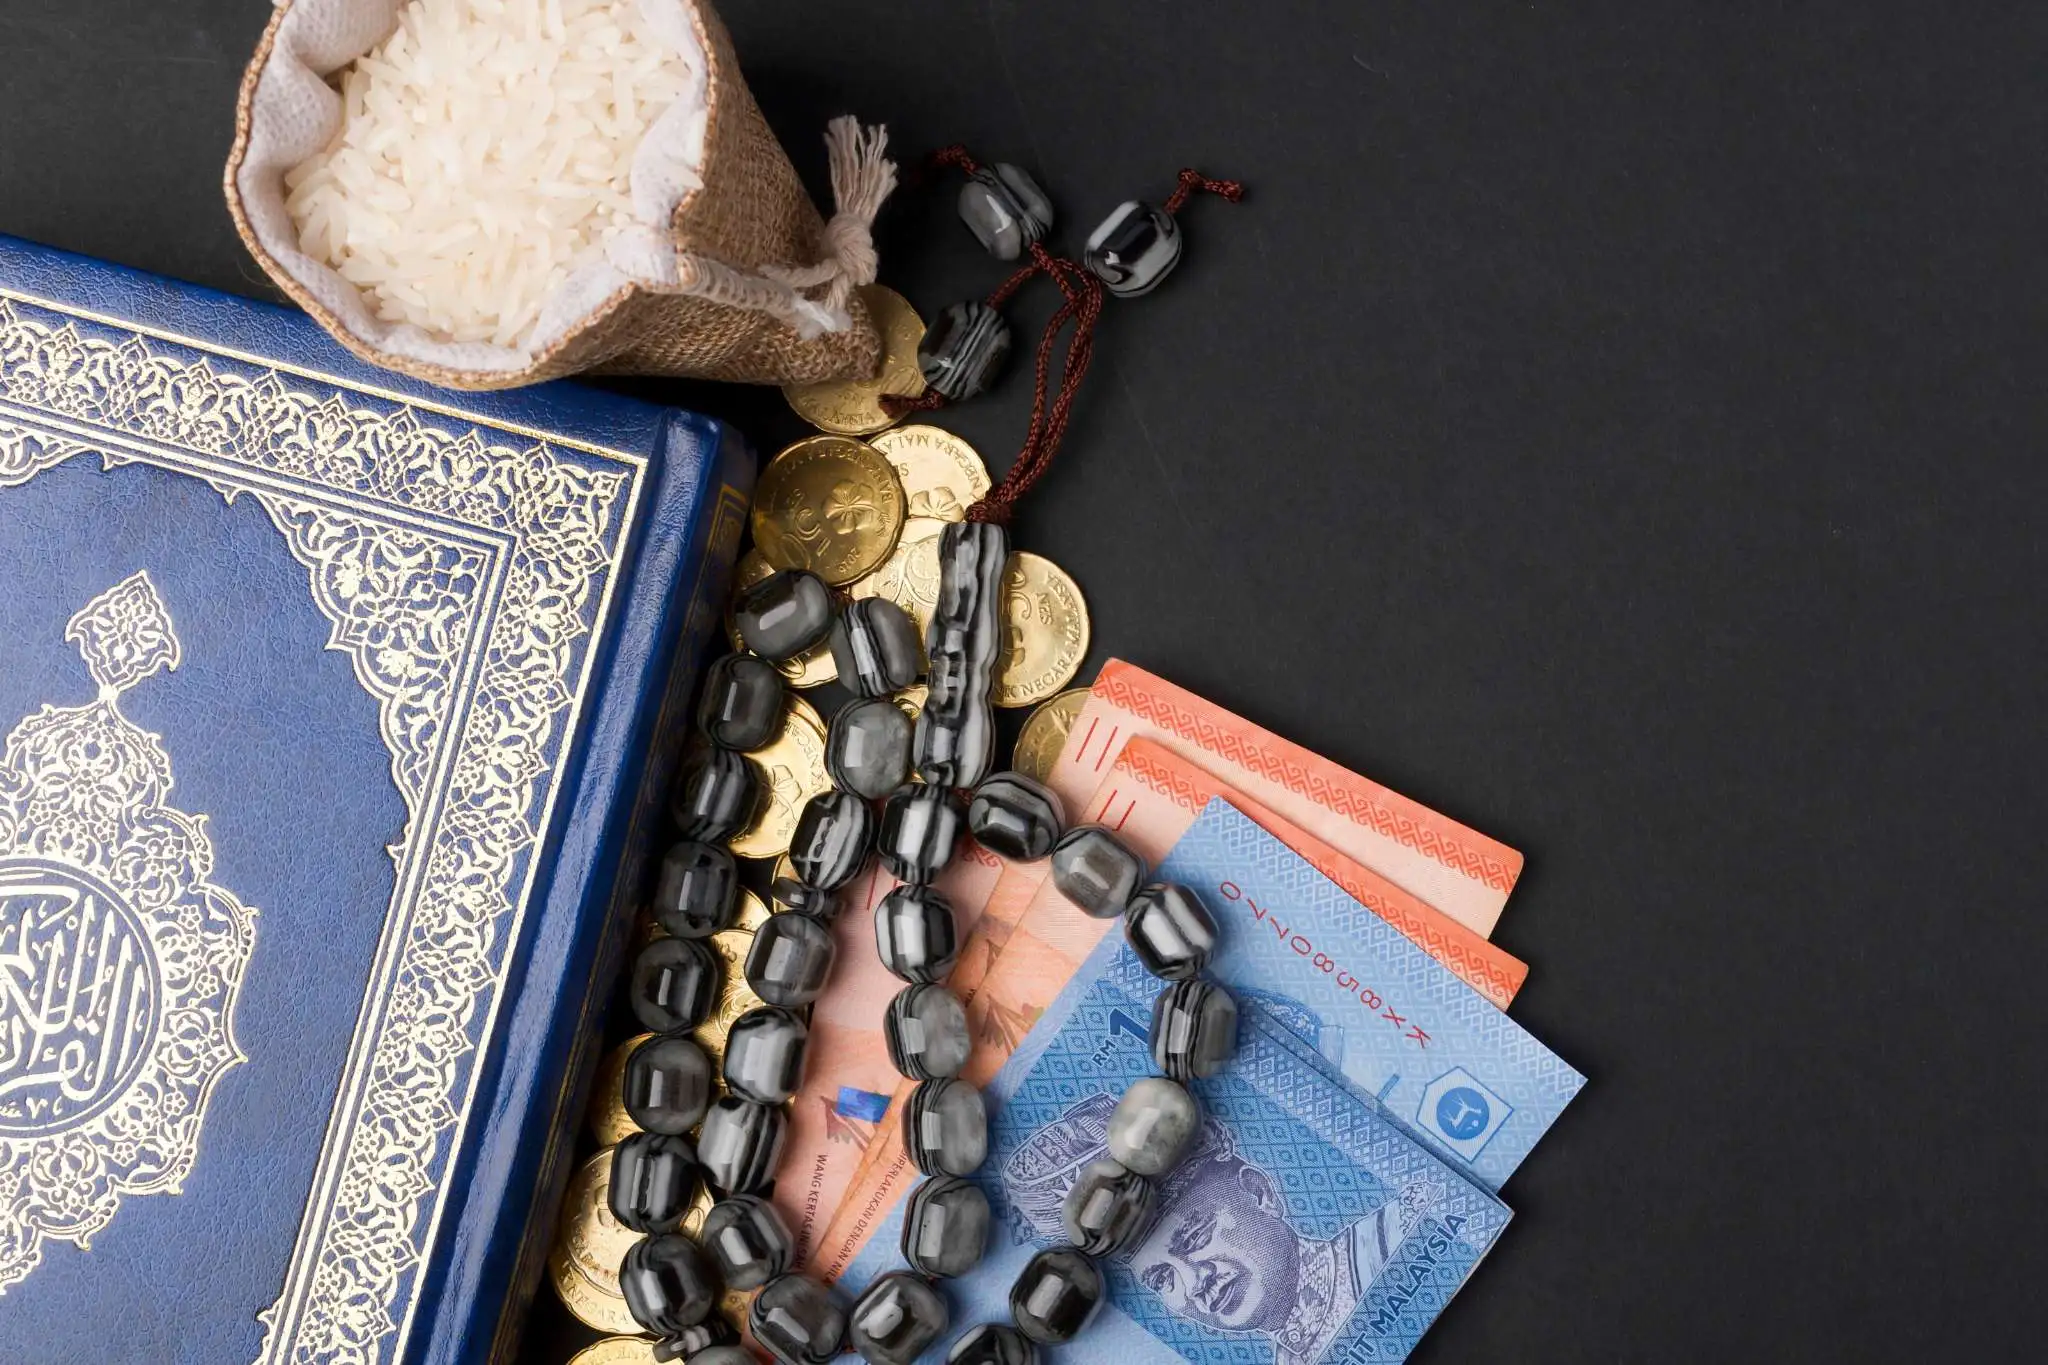 zakat is a form of alm-giving as religious obligation or tax